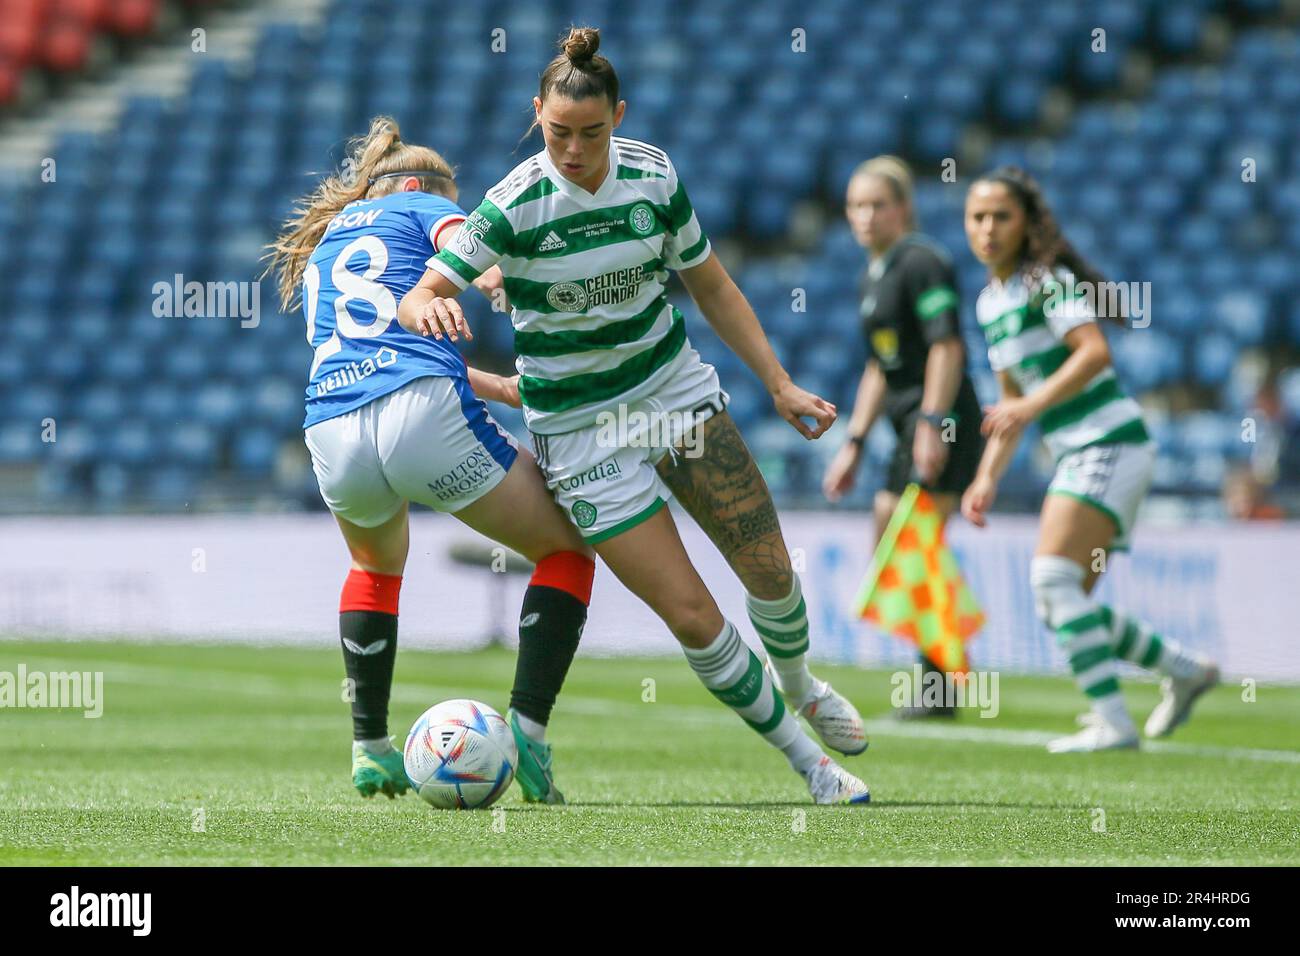 Glasgow, UK. 28th May, 2023. In the final of the Womens Scottish Cup in a game between Celtic and Rangers, Celtic won 2 - 0. The scorers were Natasha Flint, numbr 26, in 64 minutes and Claire O'Riodan, number 3, in 68 minutes. Credit: Findlay/Alamy Live News Stock Photo